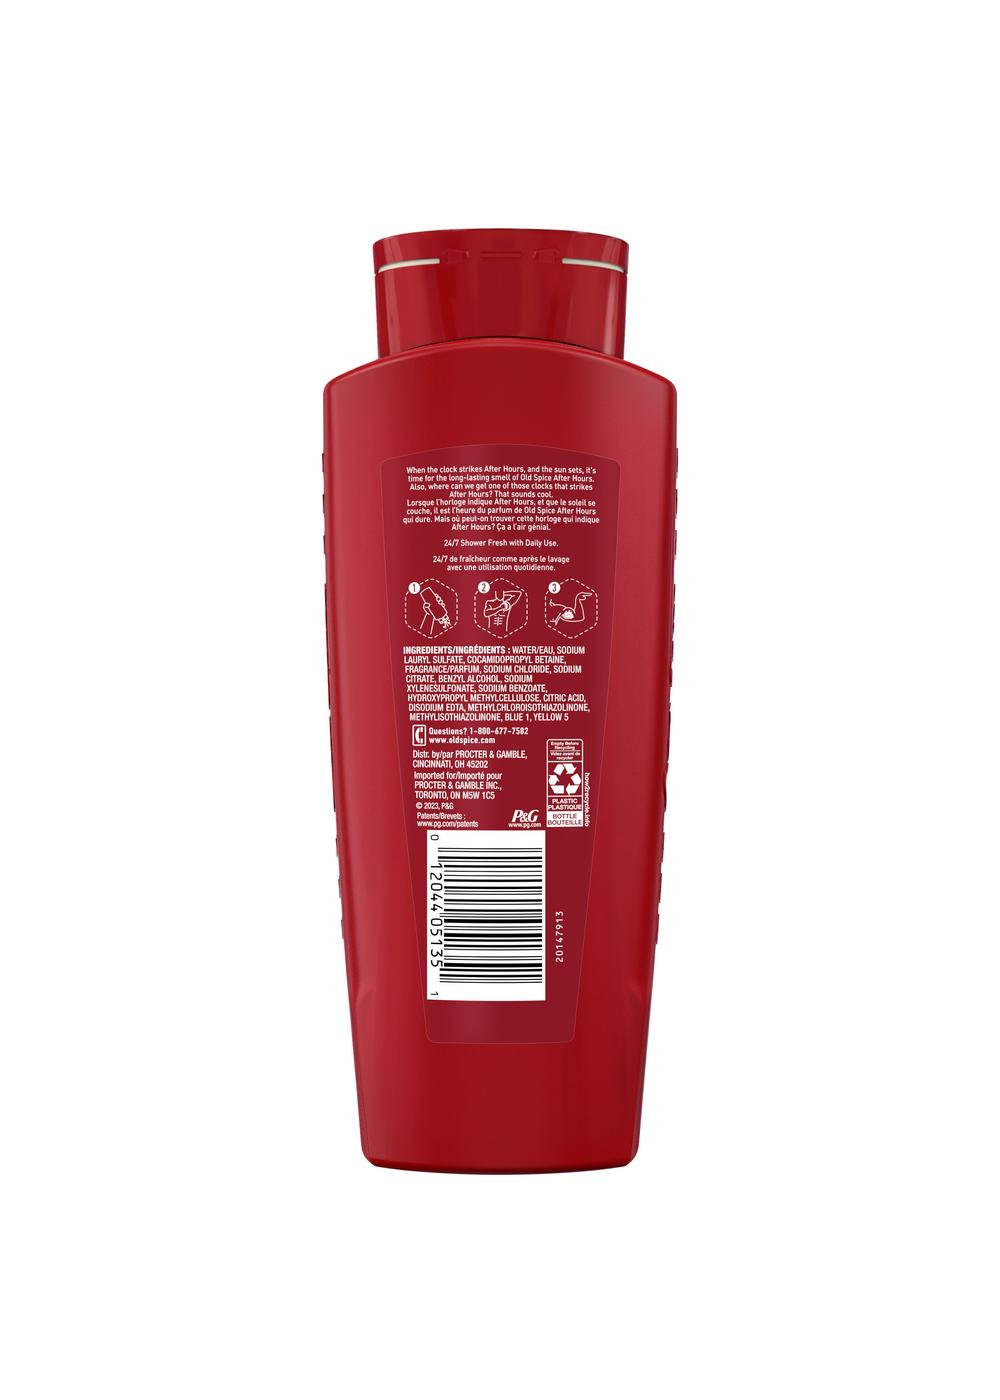 Old Spice After Hours Body Wash - Scent Of Spice; image 2 of 2